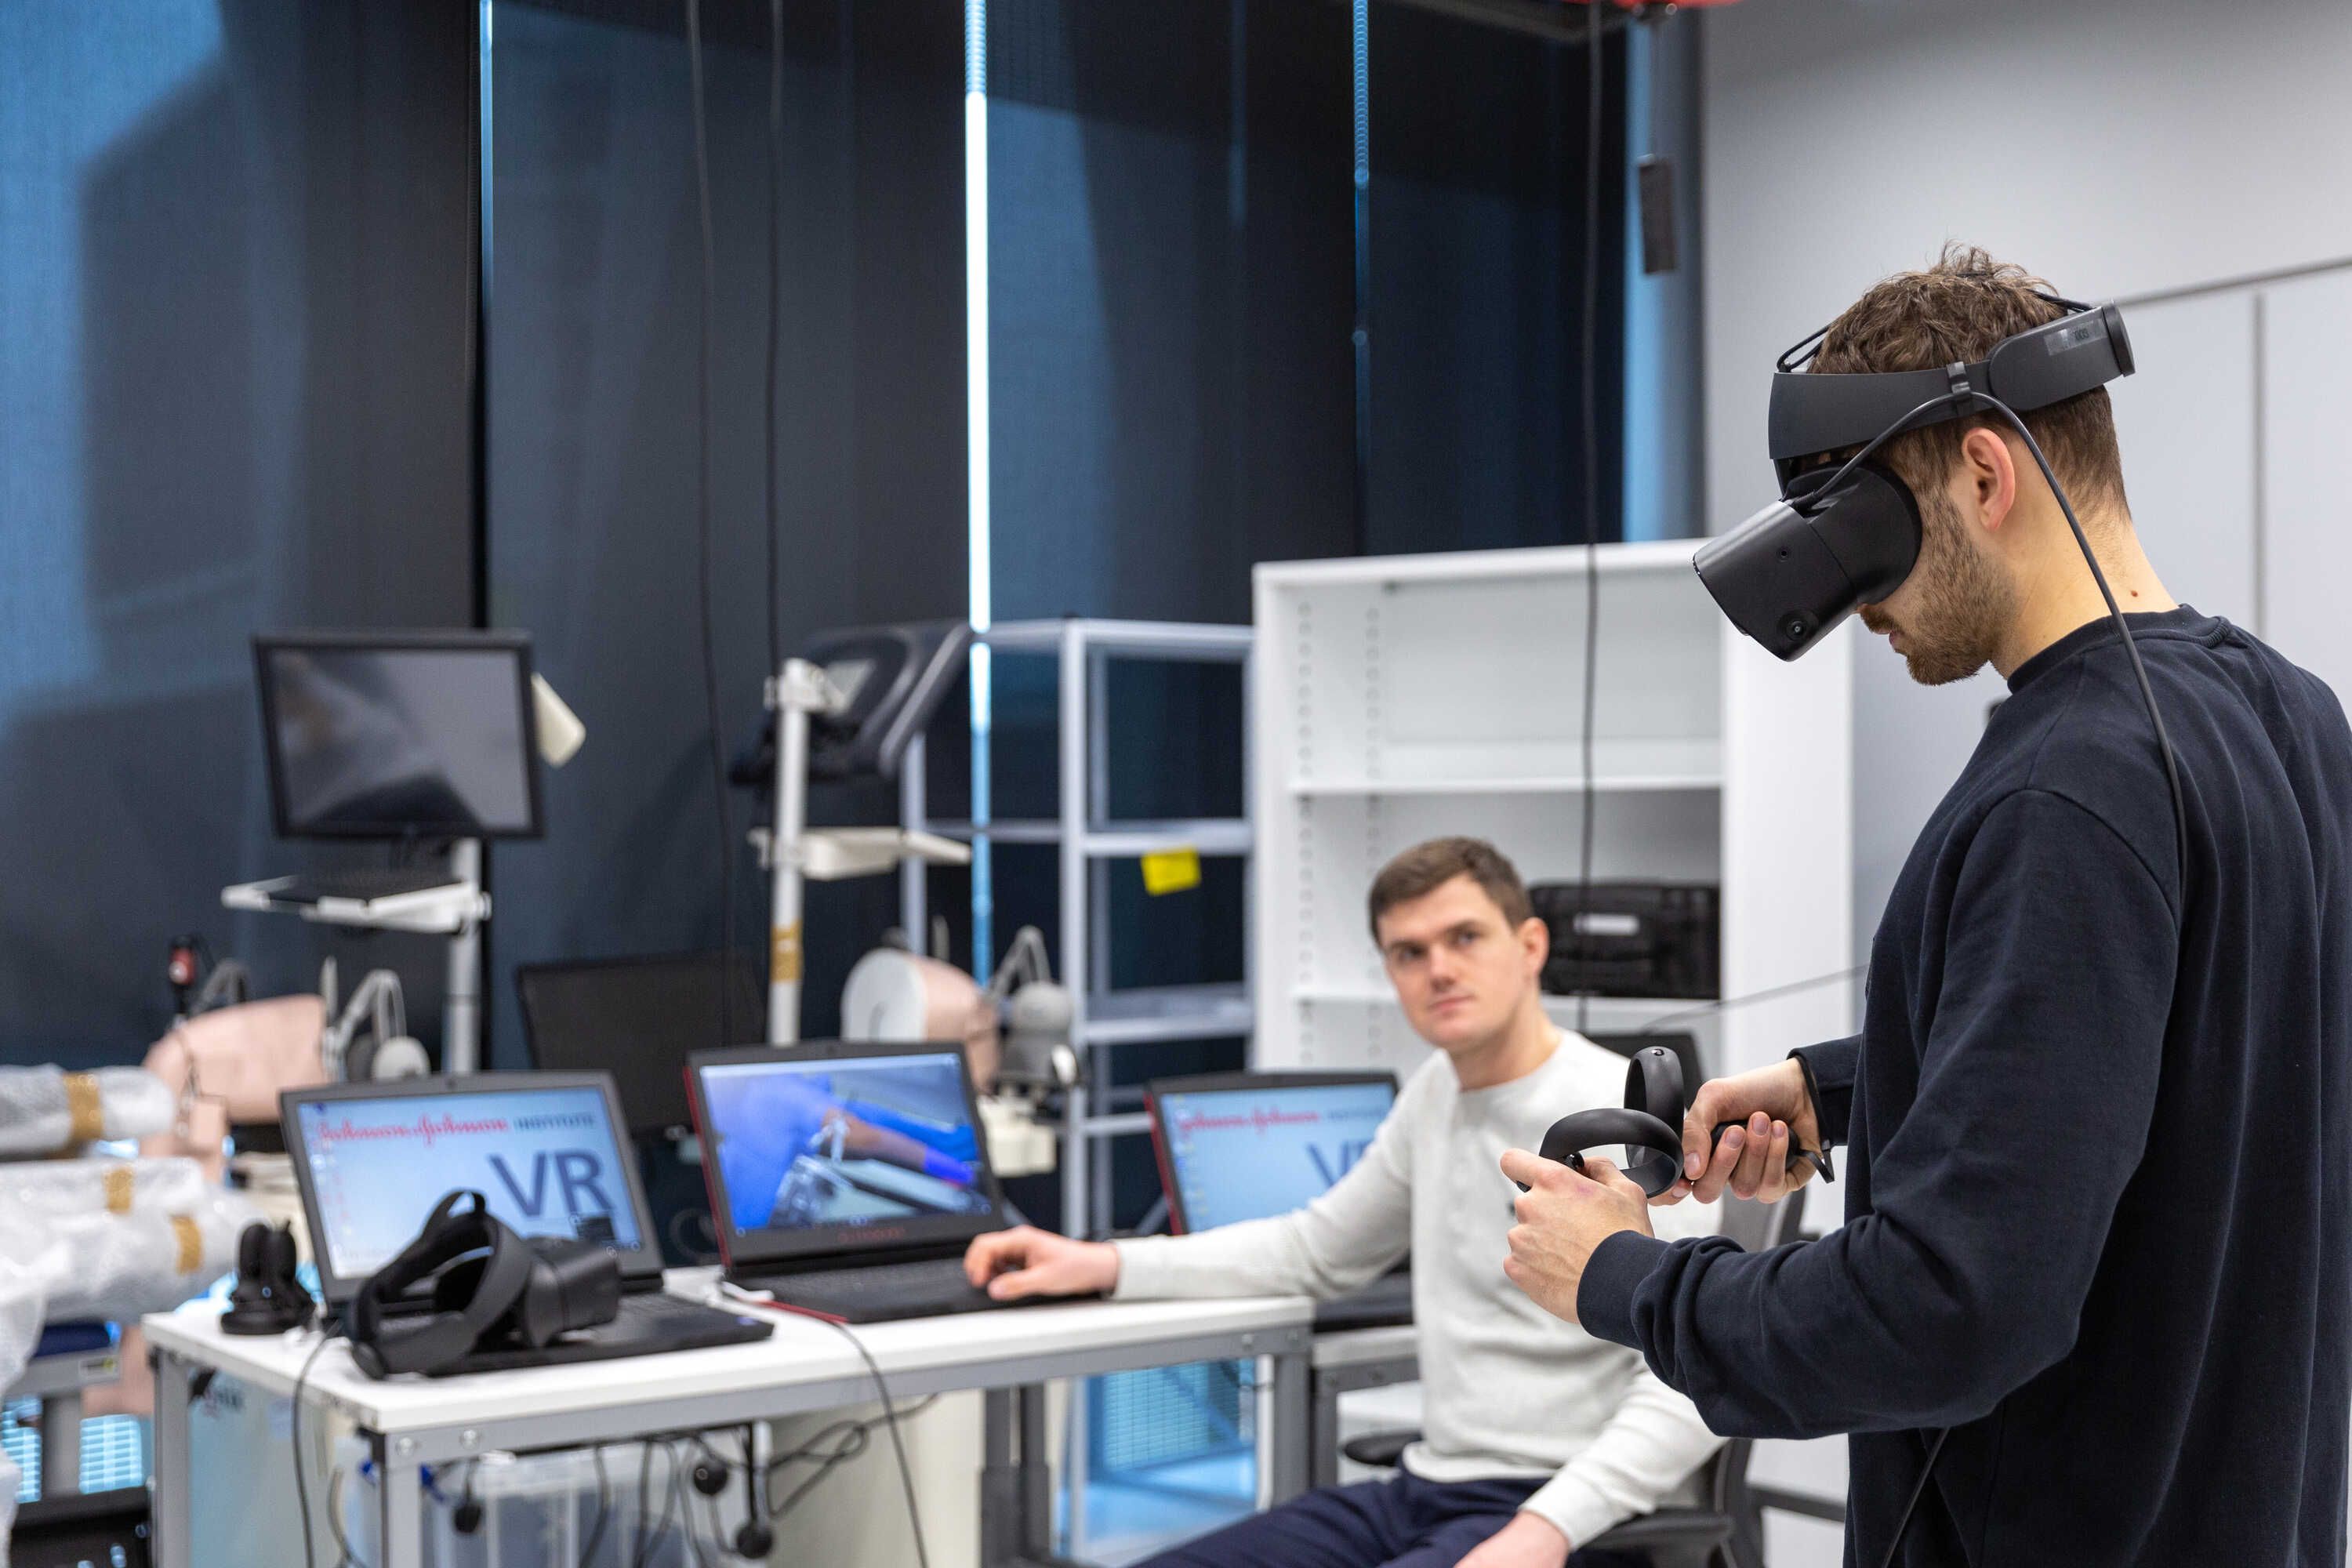 Students working on a VR project in the Sir Michael Uren Biomedical Engineering Research Hub